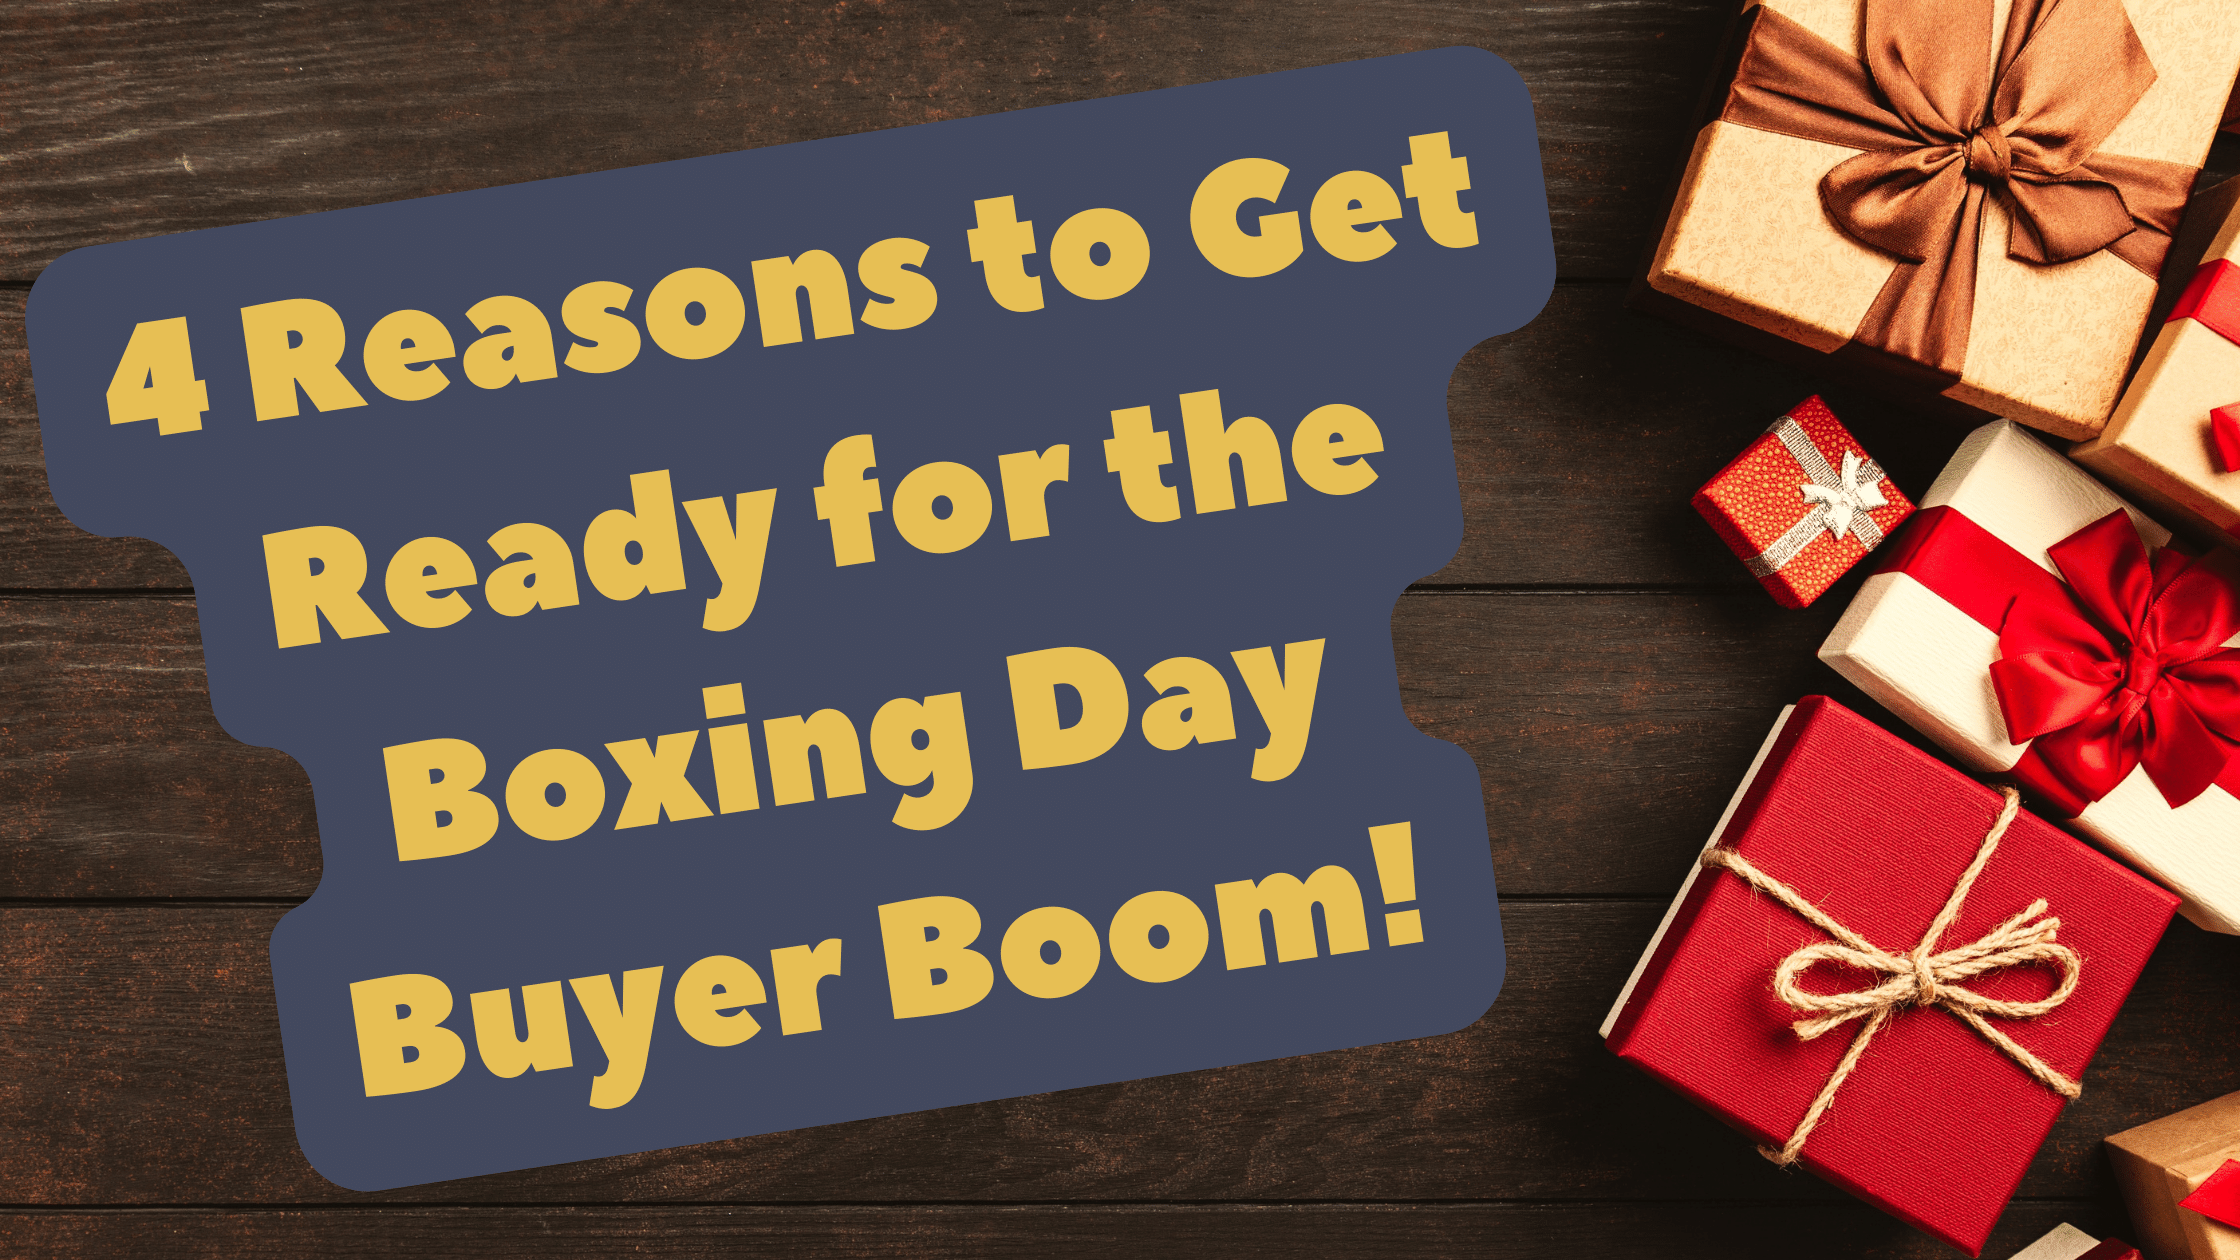 4 Reasons to Get Ready for the Boxing Day Buyer Boom!